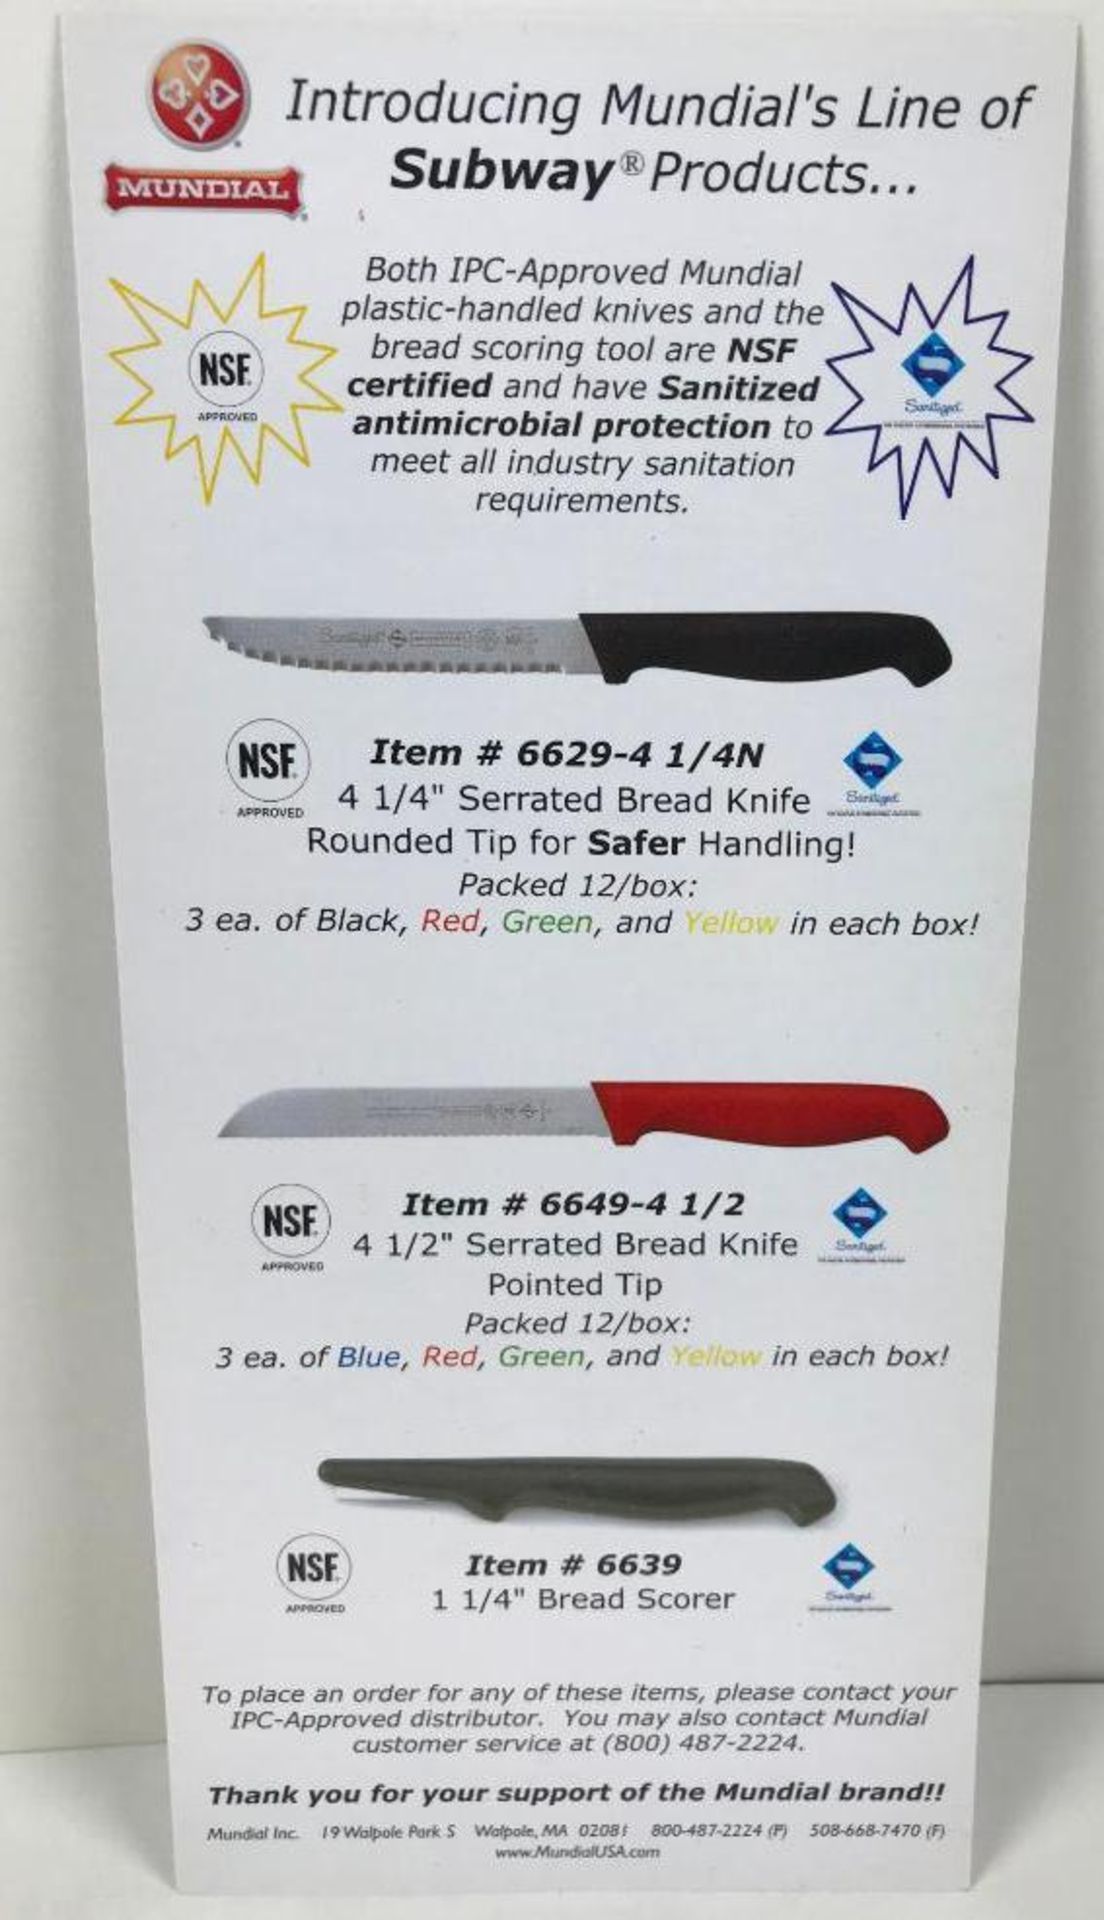 MUNDIAL 4.5" POINTED TIP UTILITY KNIFE - LOT OF 12 - 6649-4 1/2 - NEW - Image 5 of 7